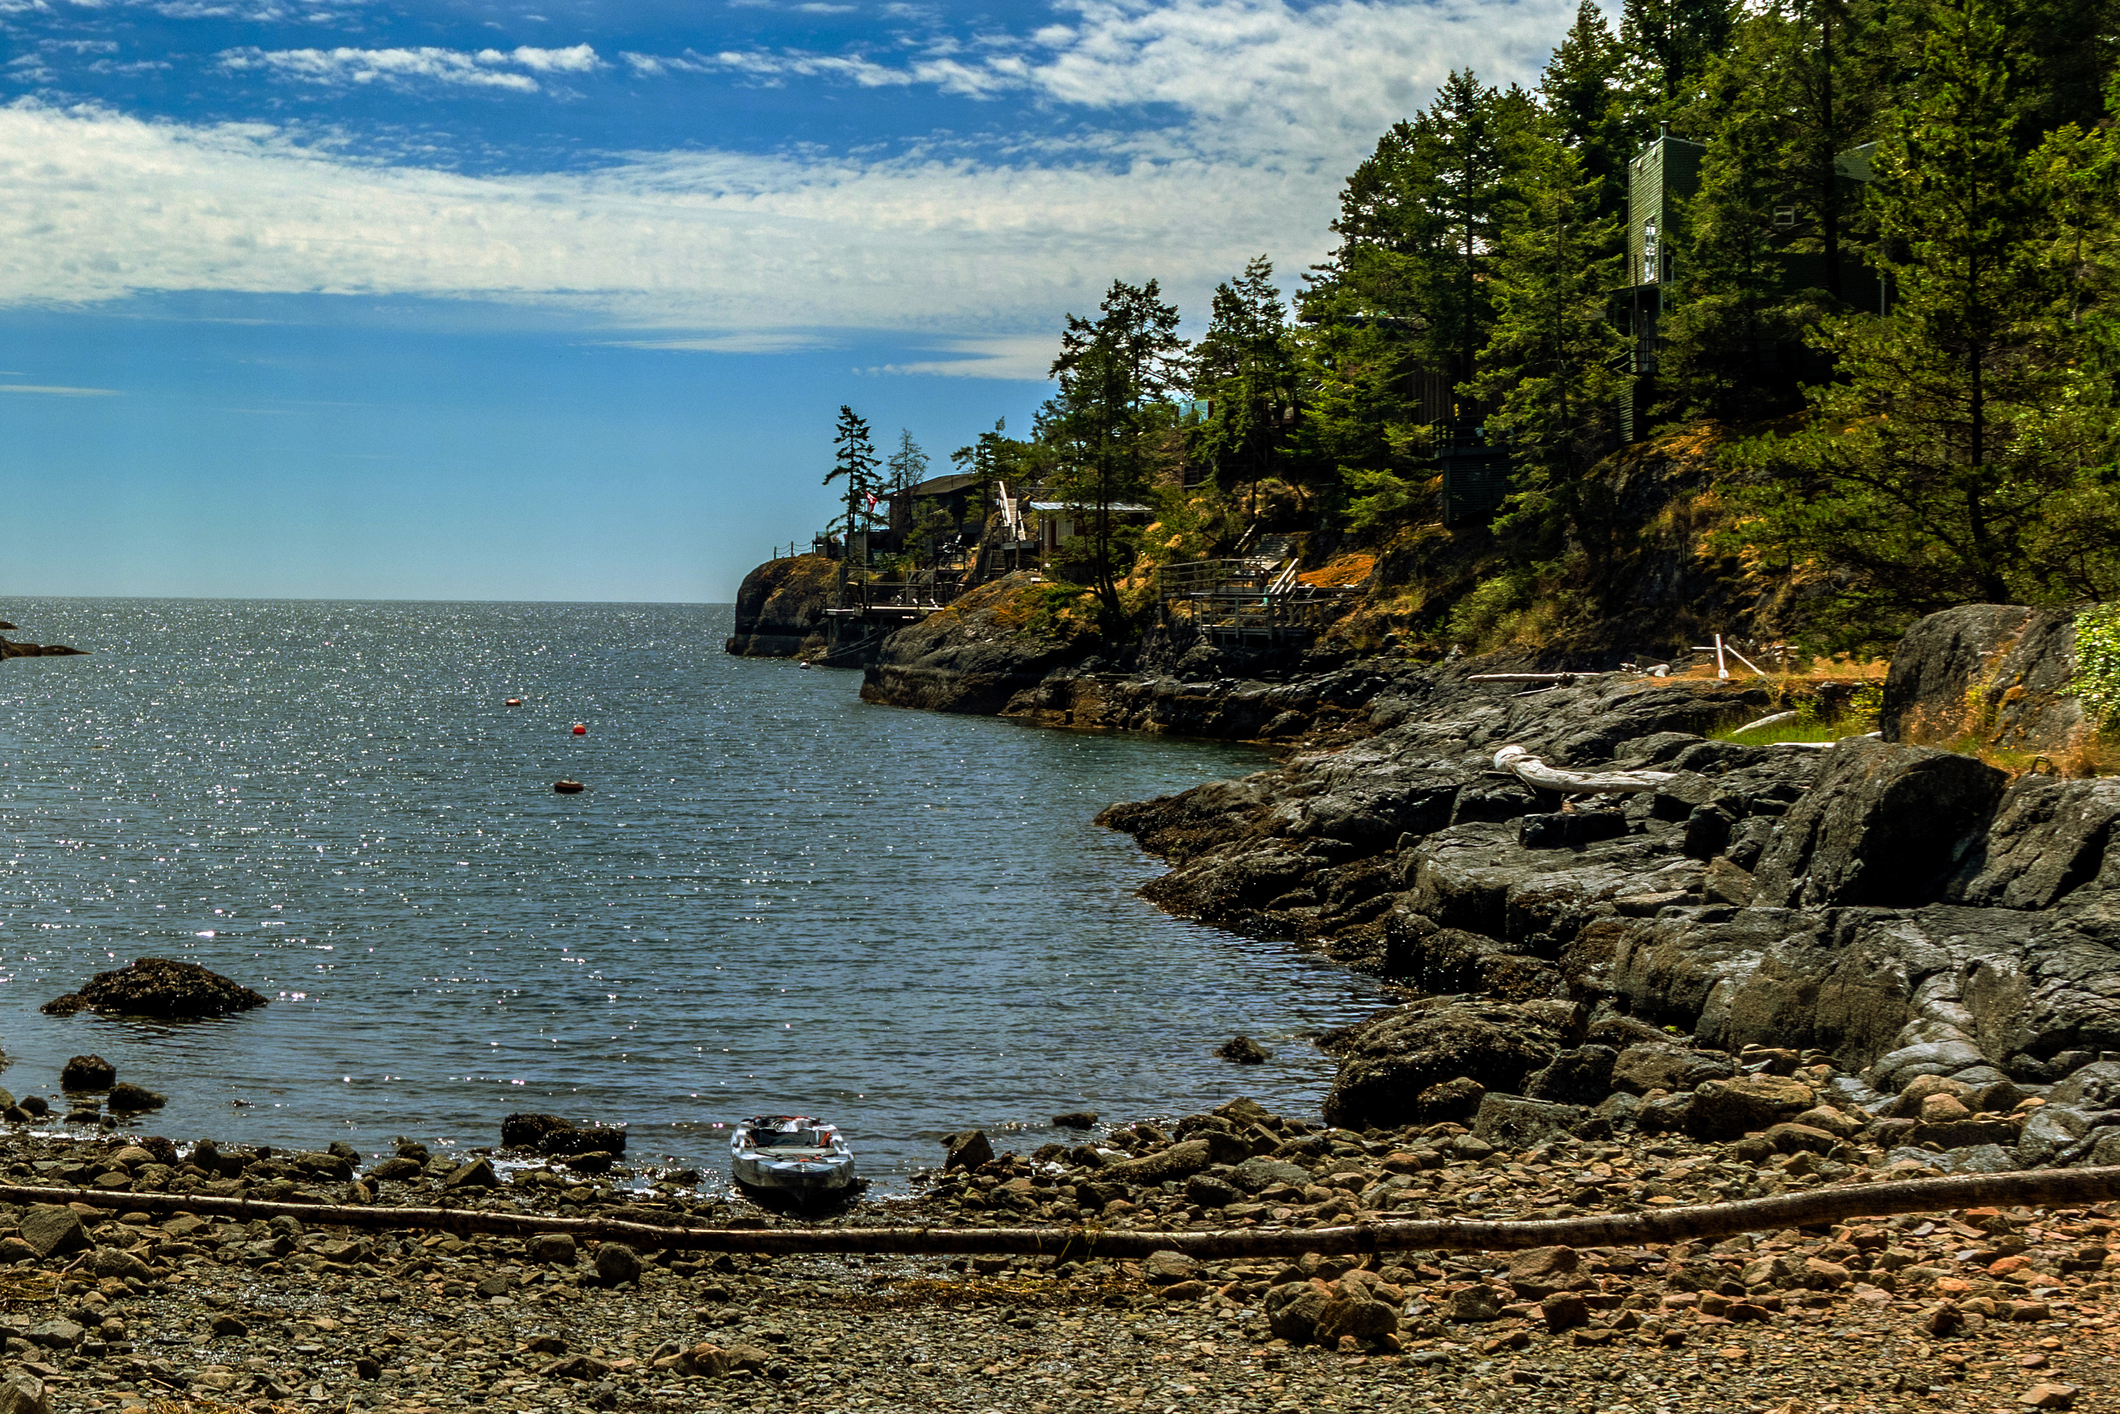 A boat beached on a rocky coastline that gives way to thick forest.